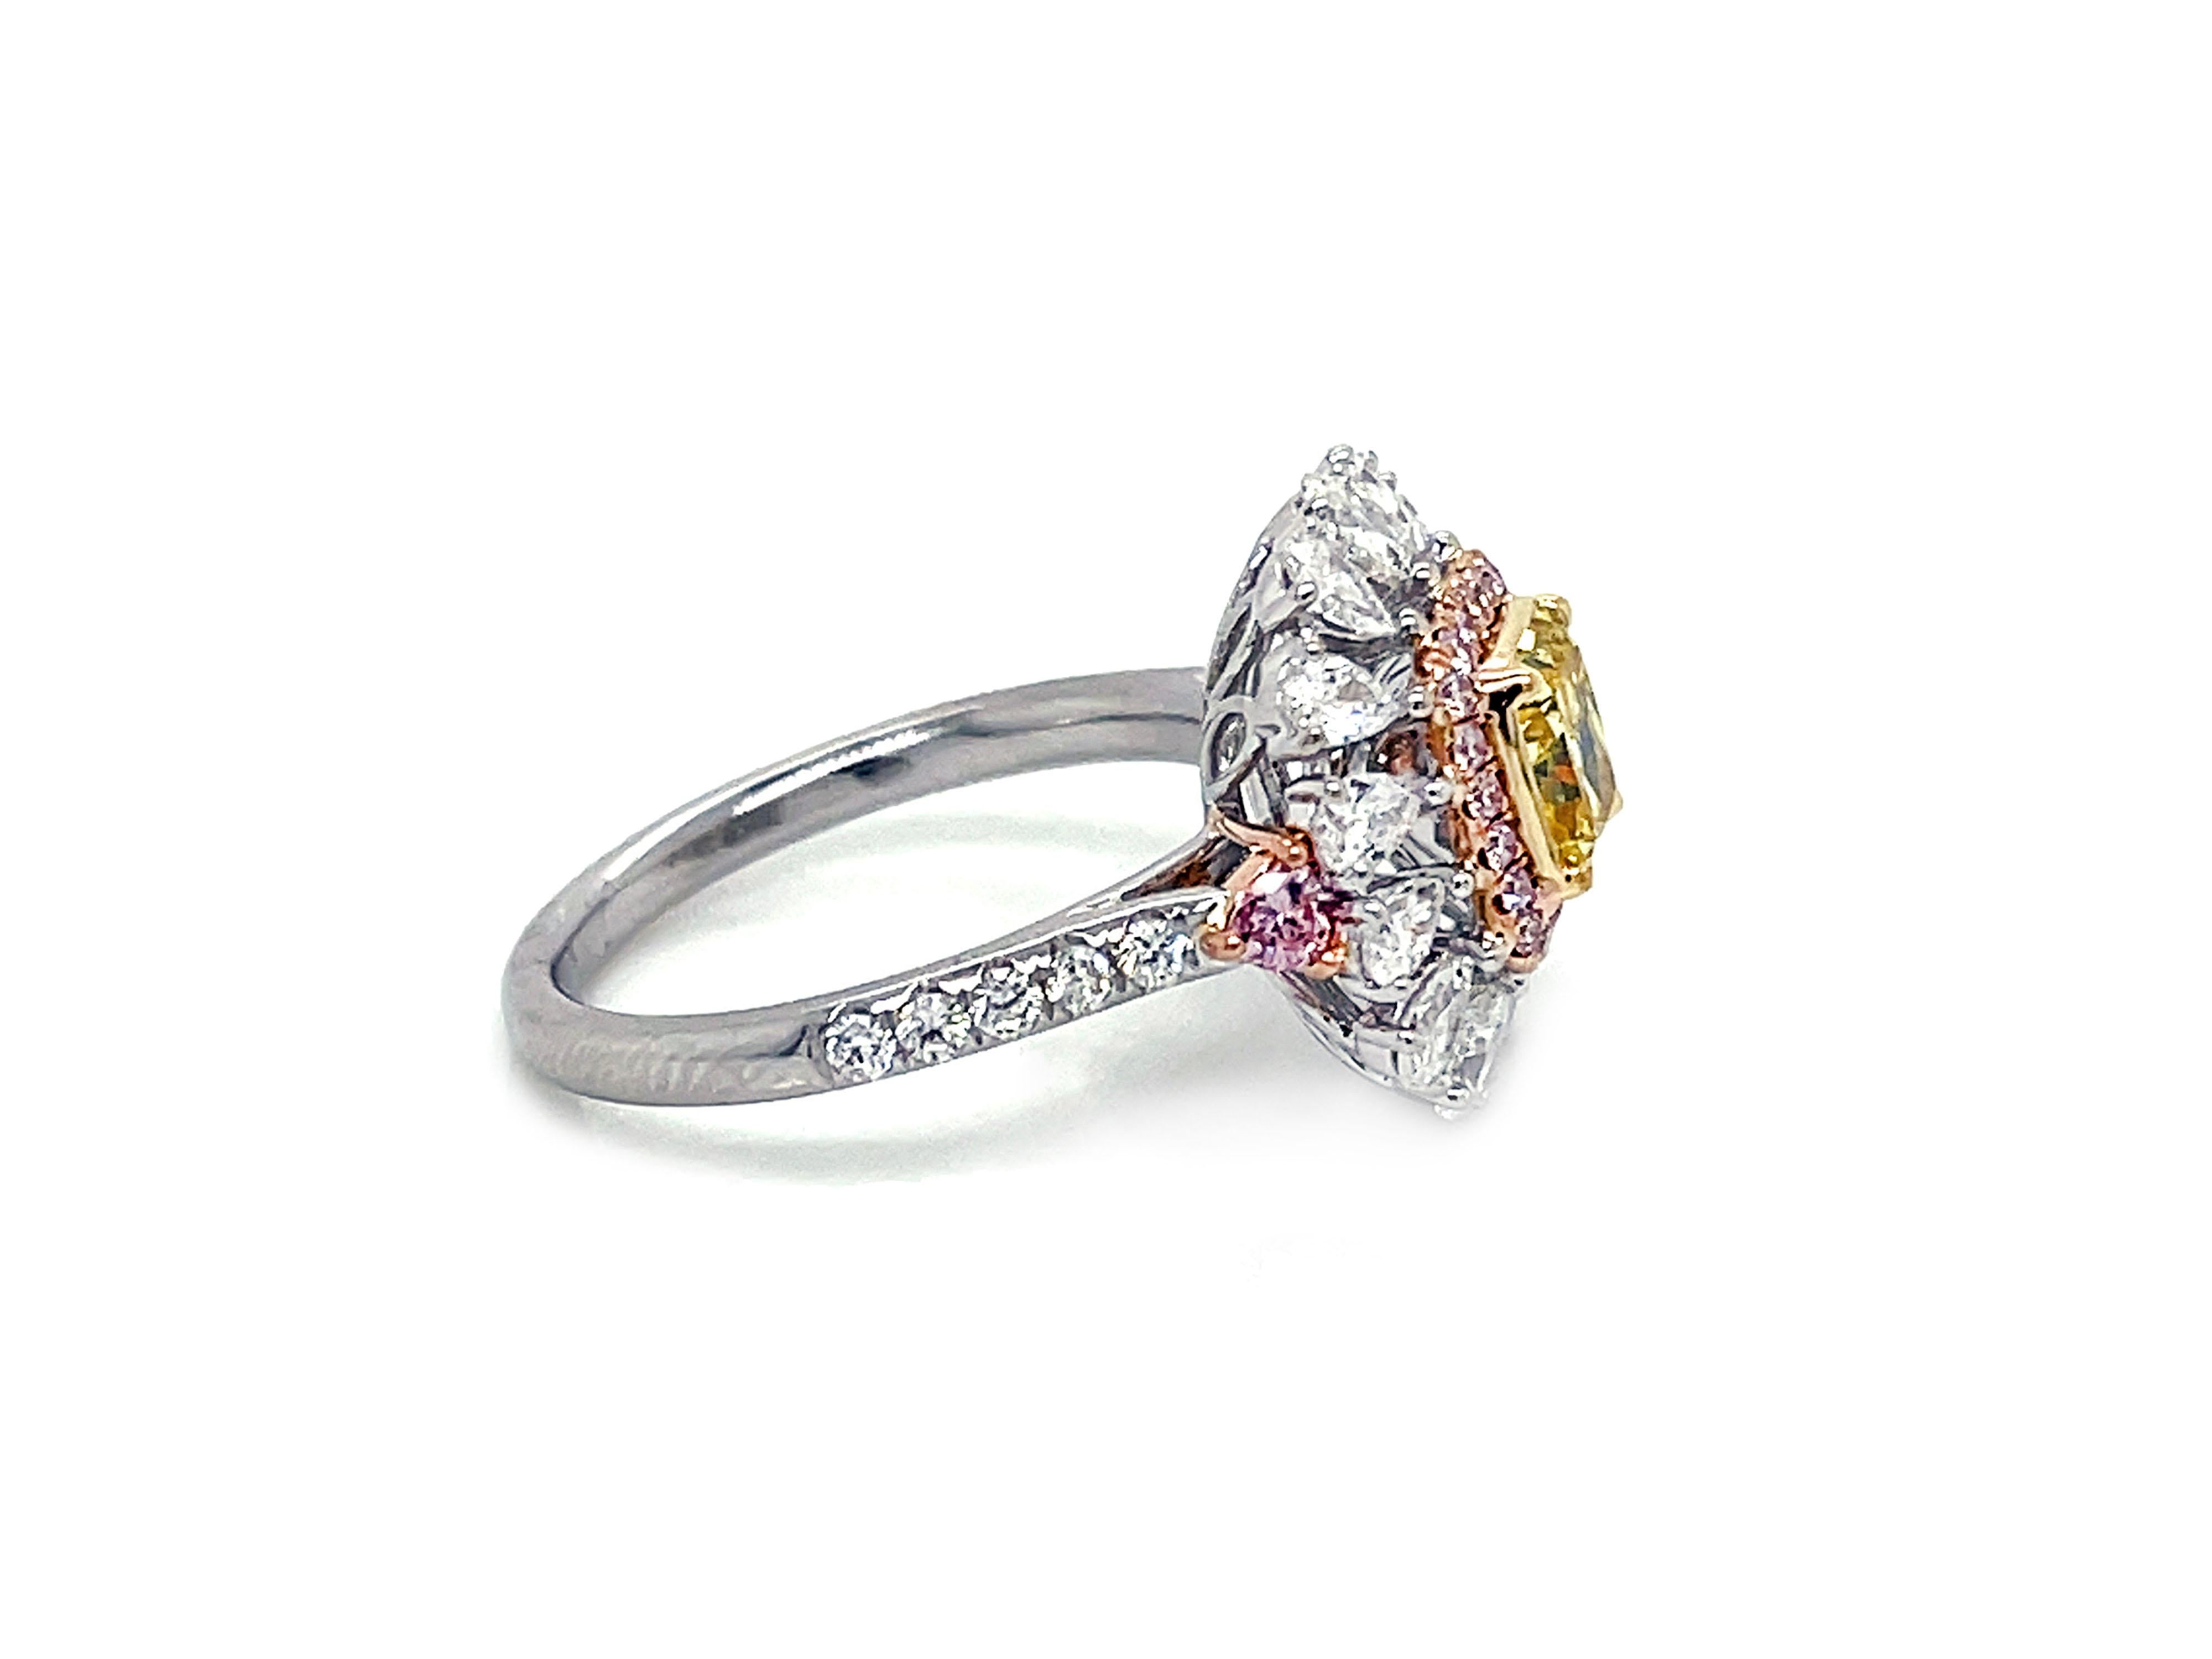 Victorian 1 Carat Fancy Vivid Yellow Diamond Engagement Cocktail Ring, GIA Certified 18K G For Sale